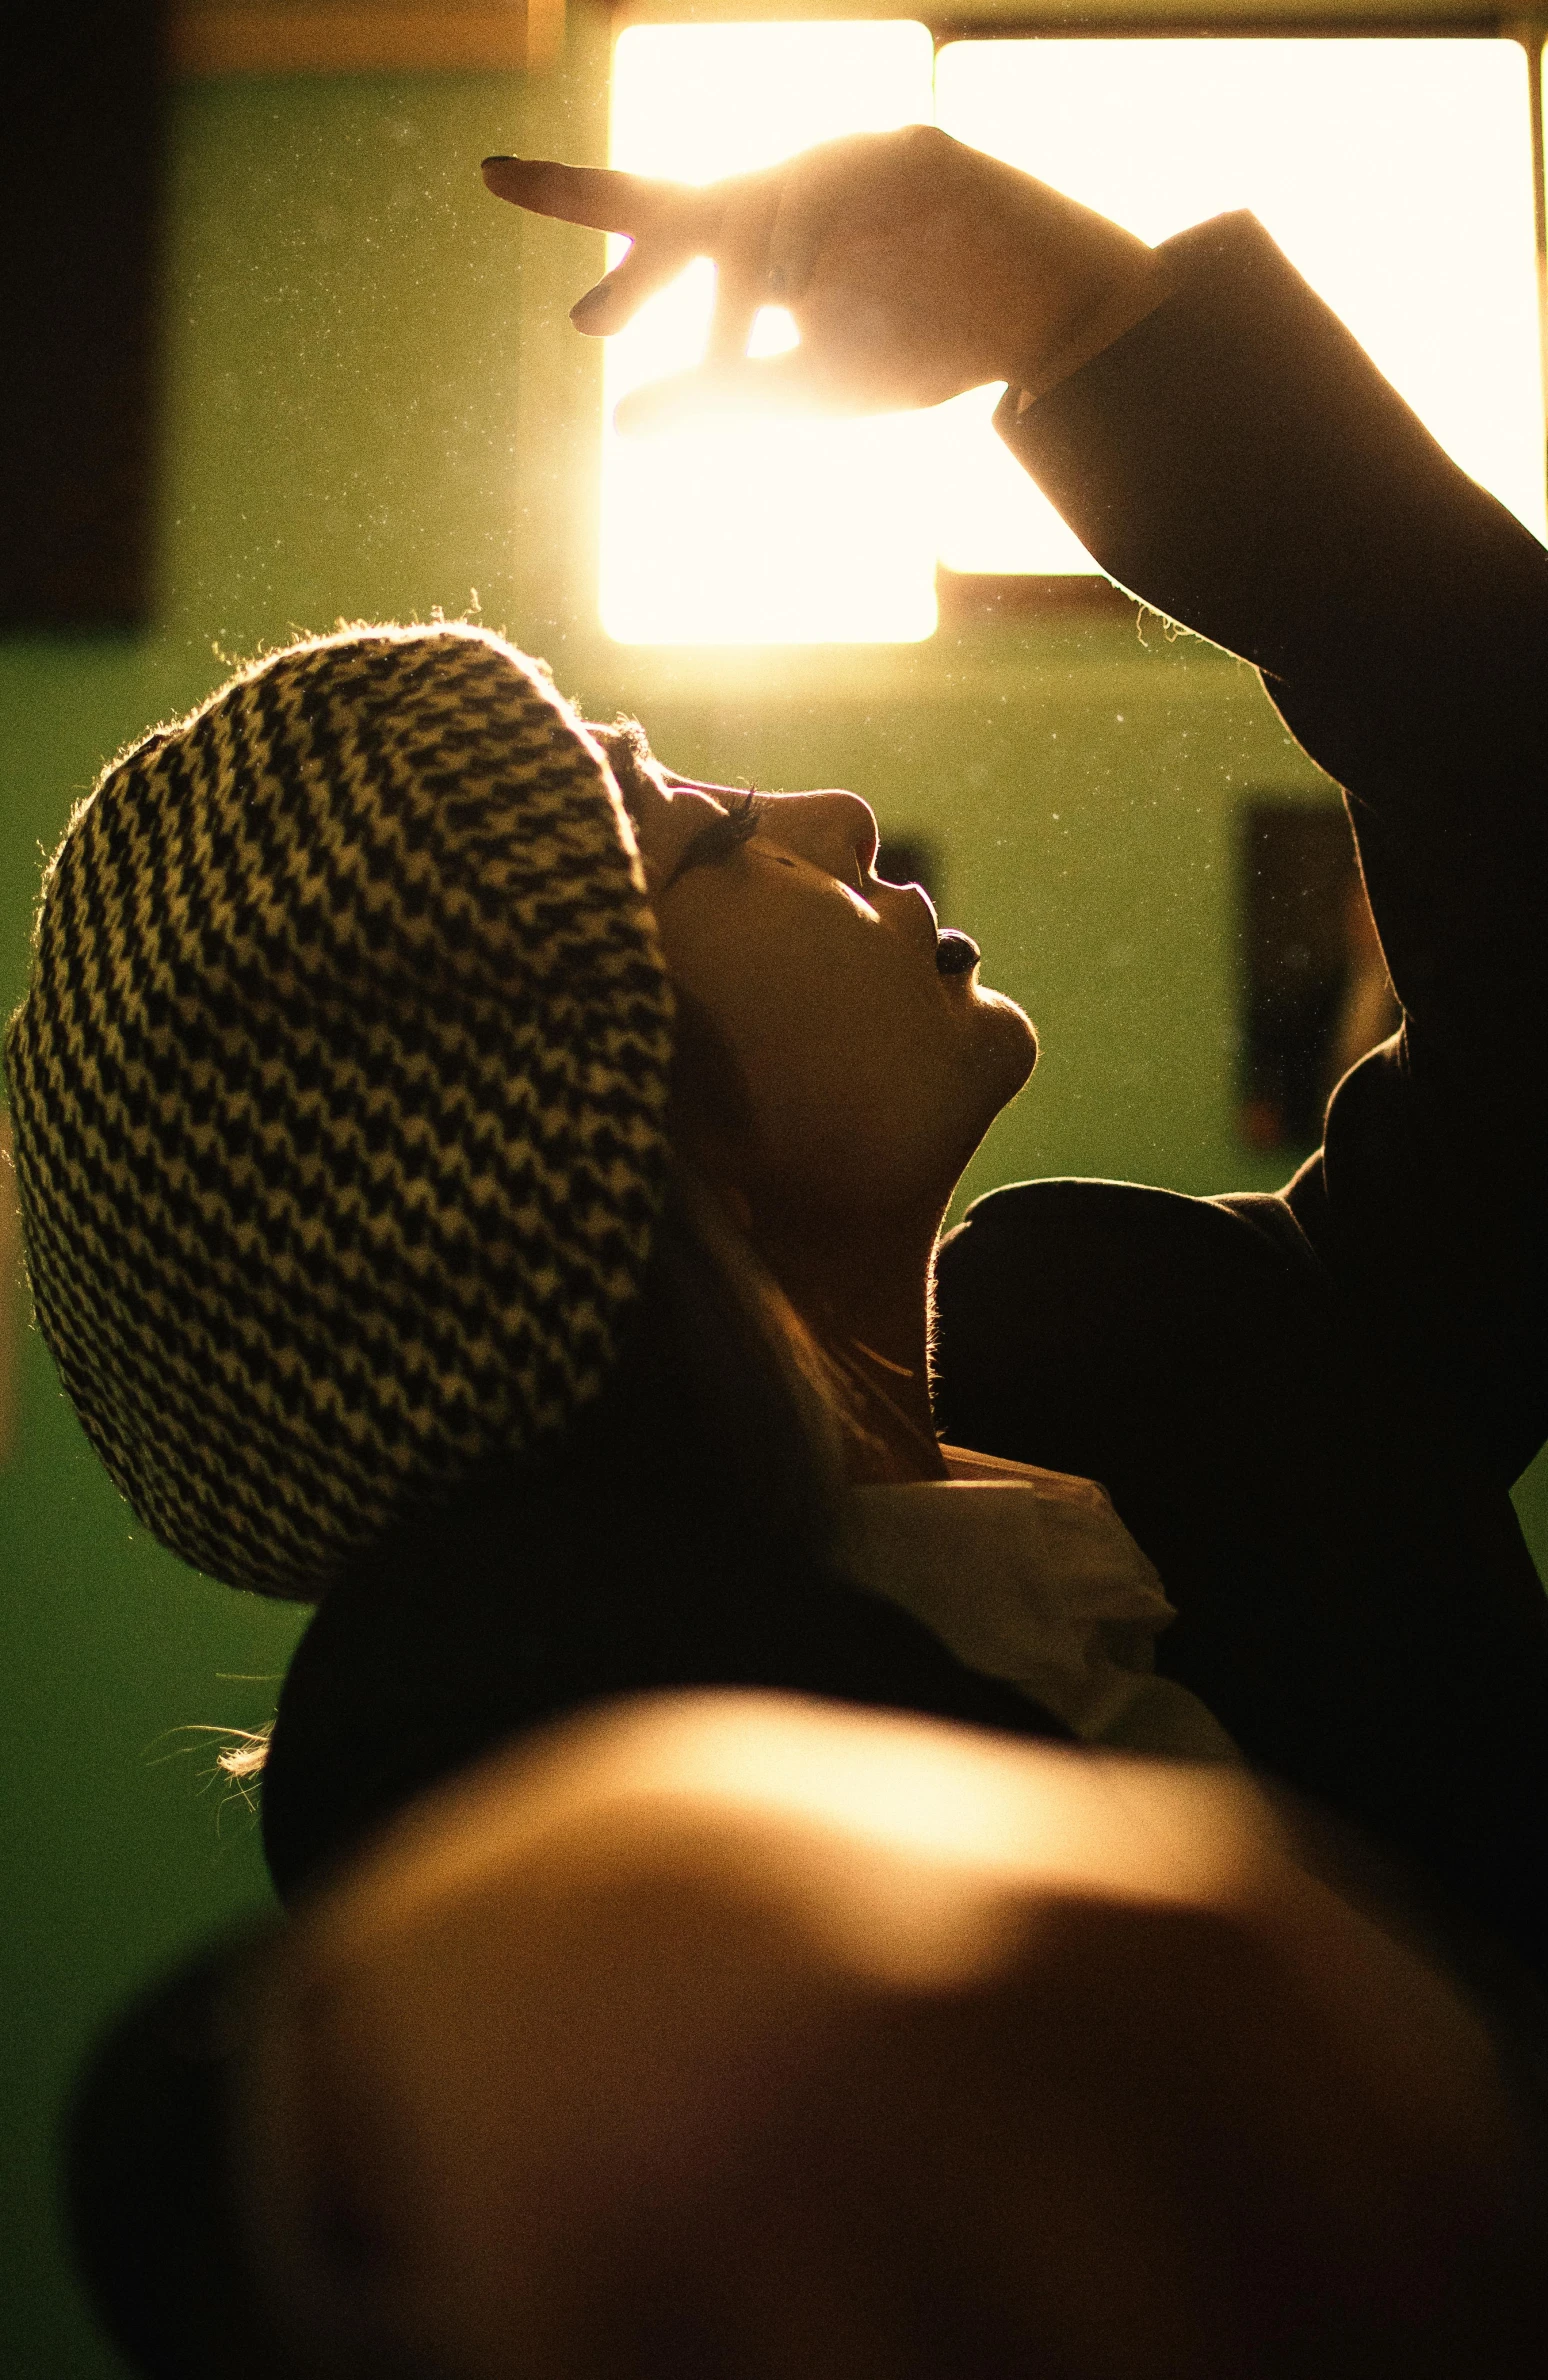 a person holding a cell phone up in the air, by Andrew Domachowski, light and space, beanie, checking her phone, back light, film movie still